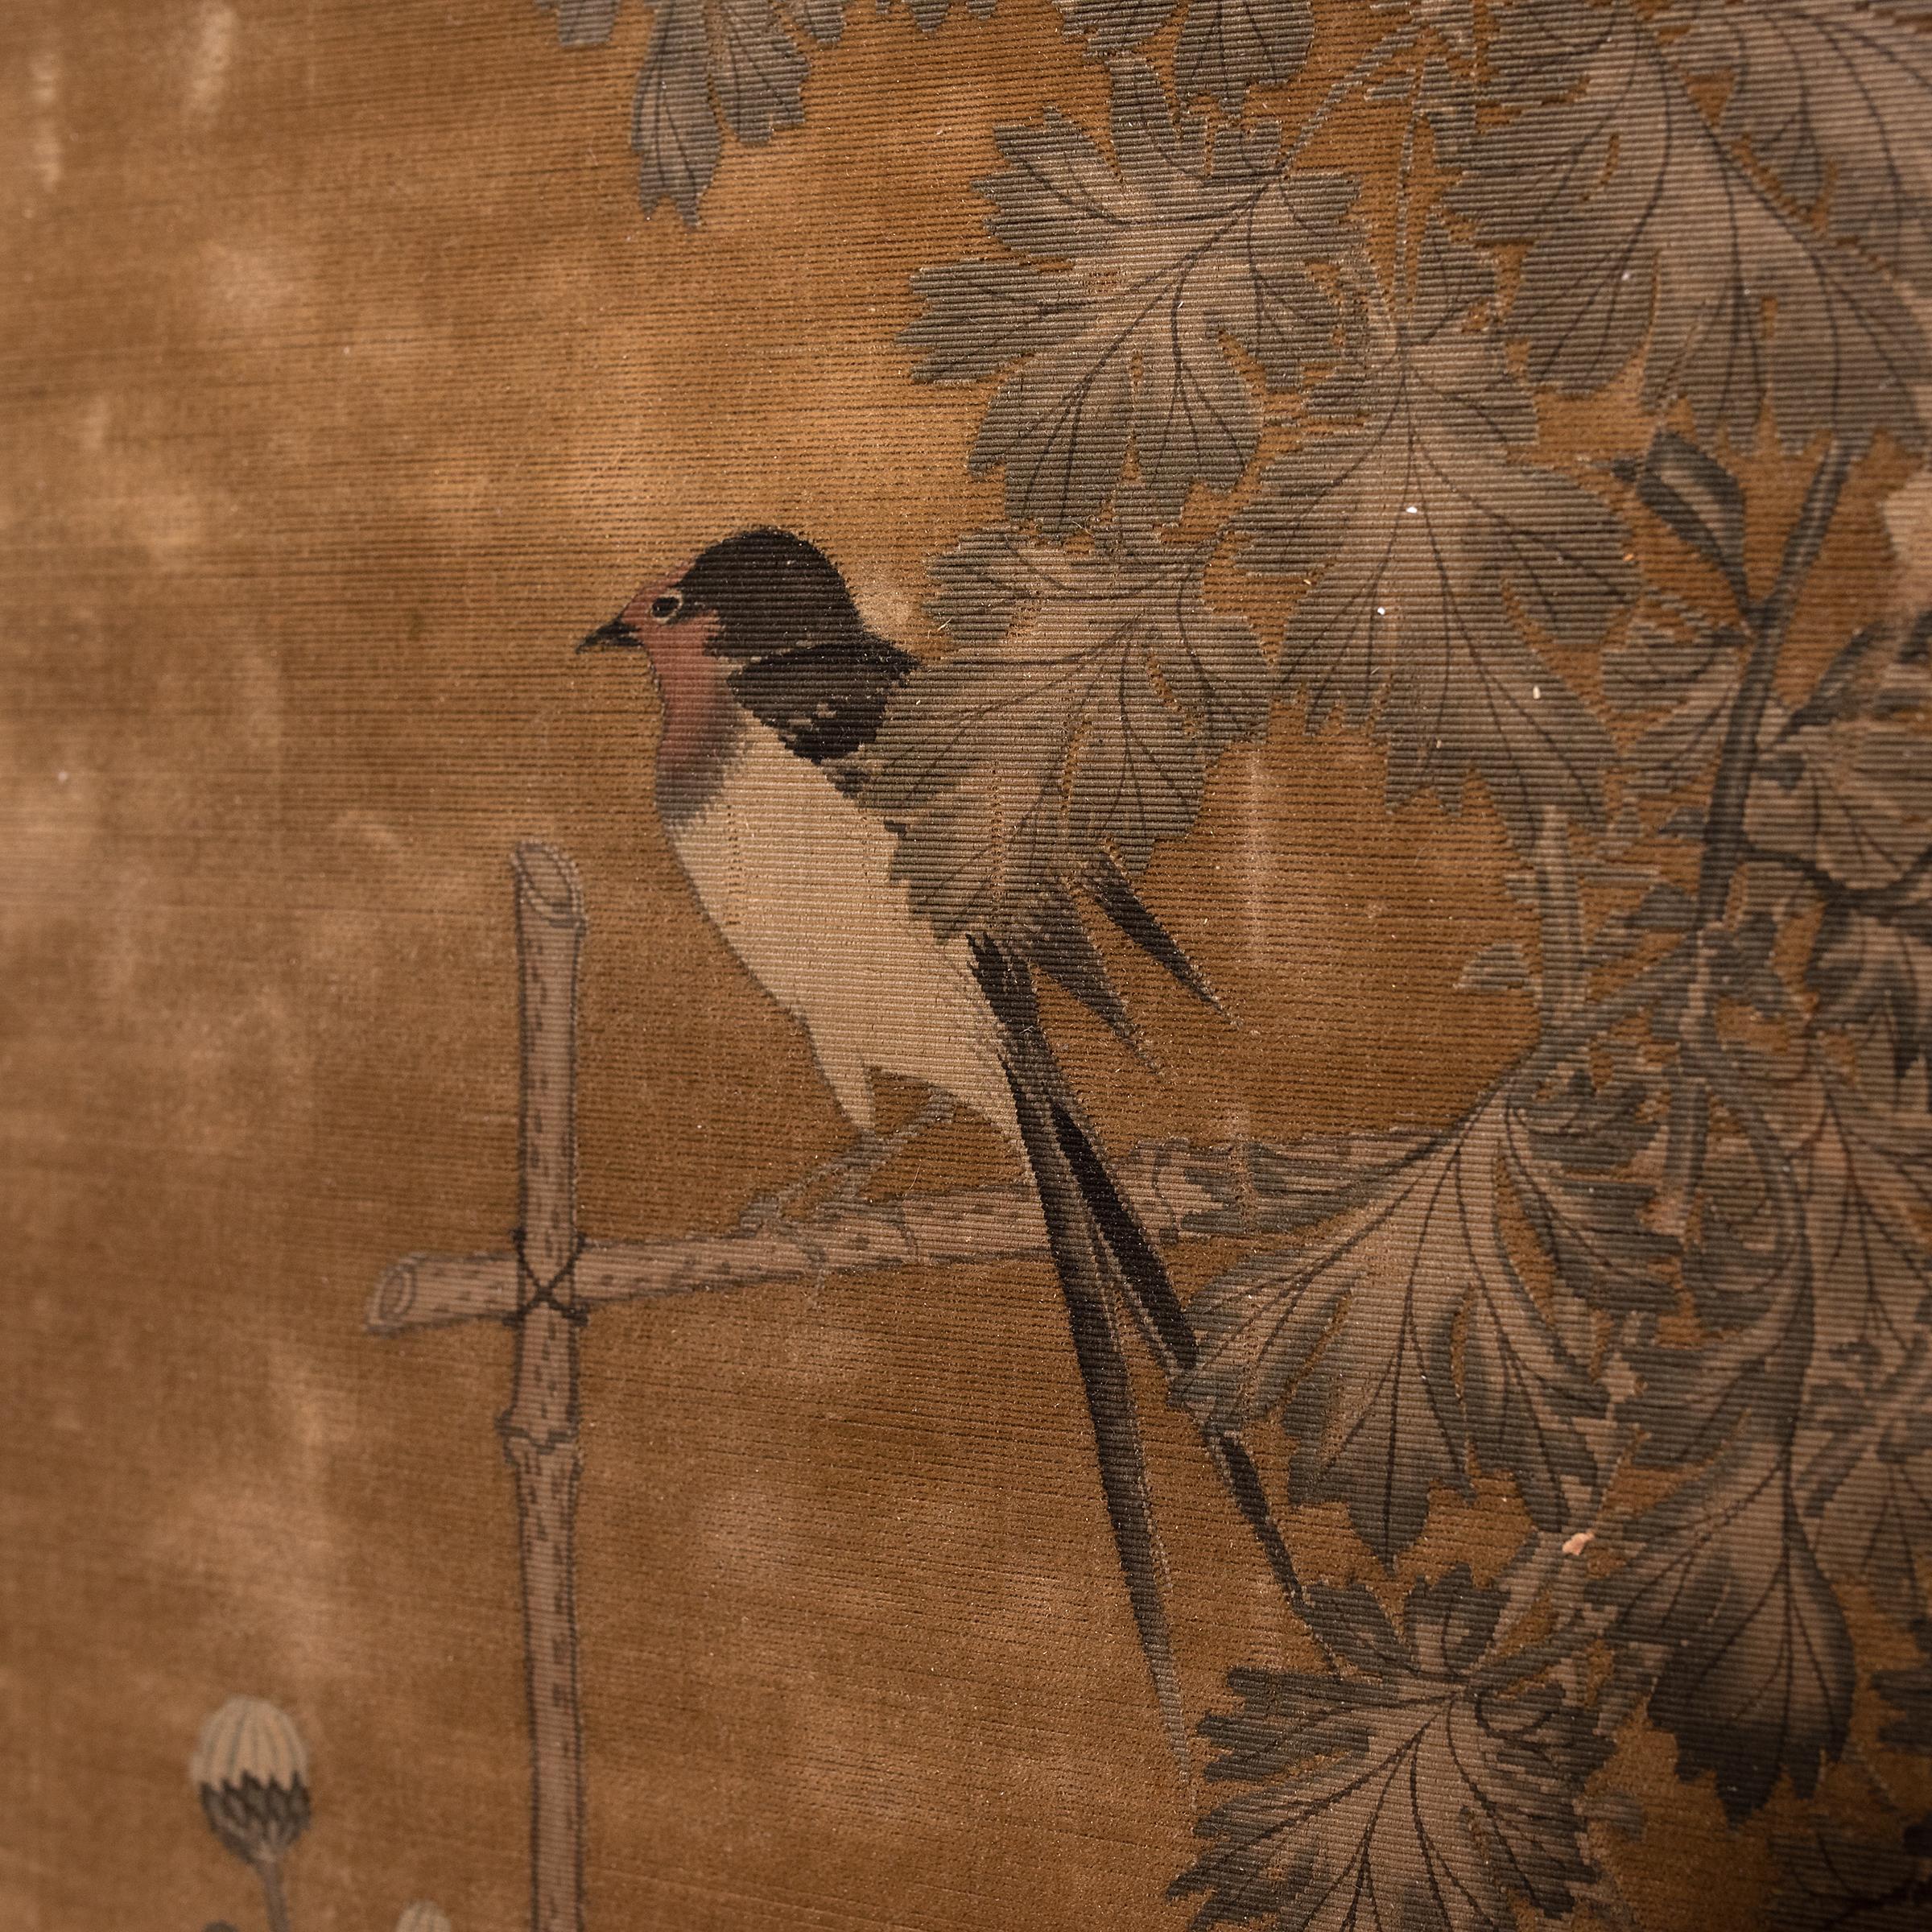 Hand-Painted Japanese Velvet Scroll Painting of Magpies and Chrysanthemums, Meiji Period